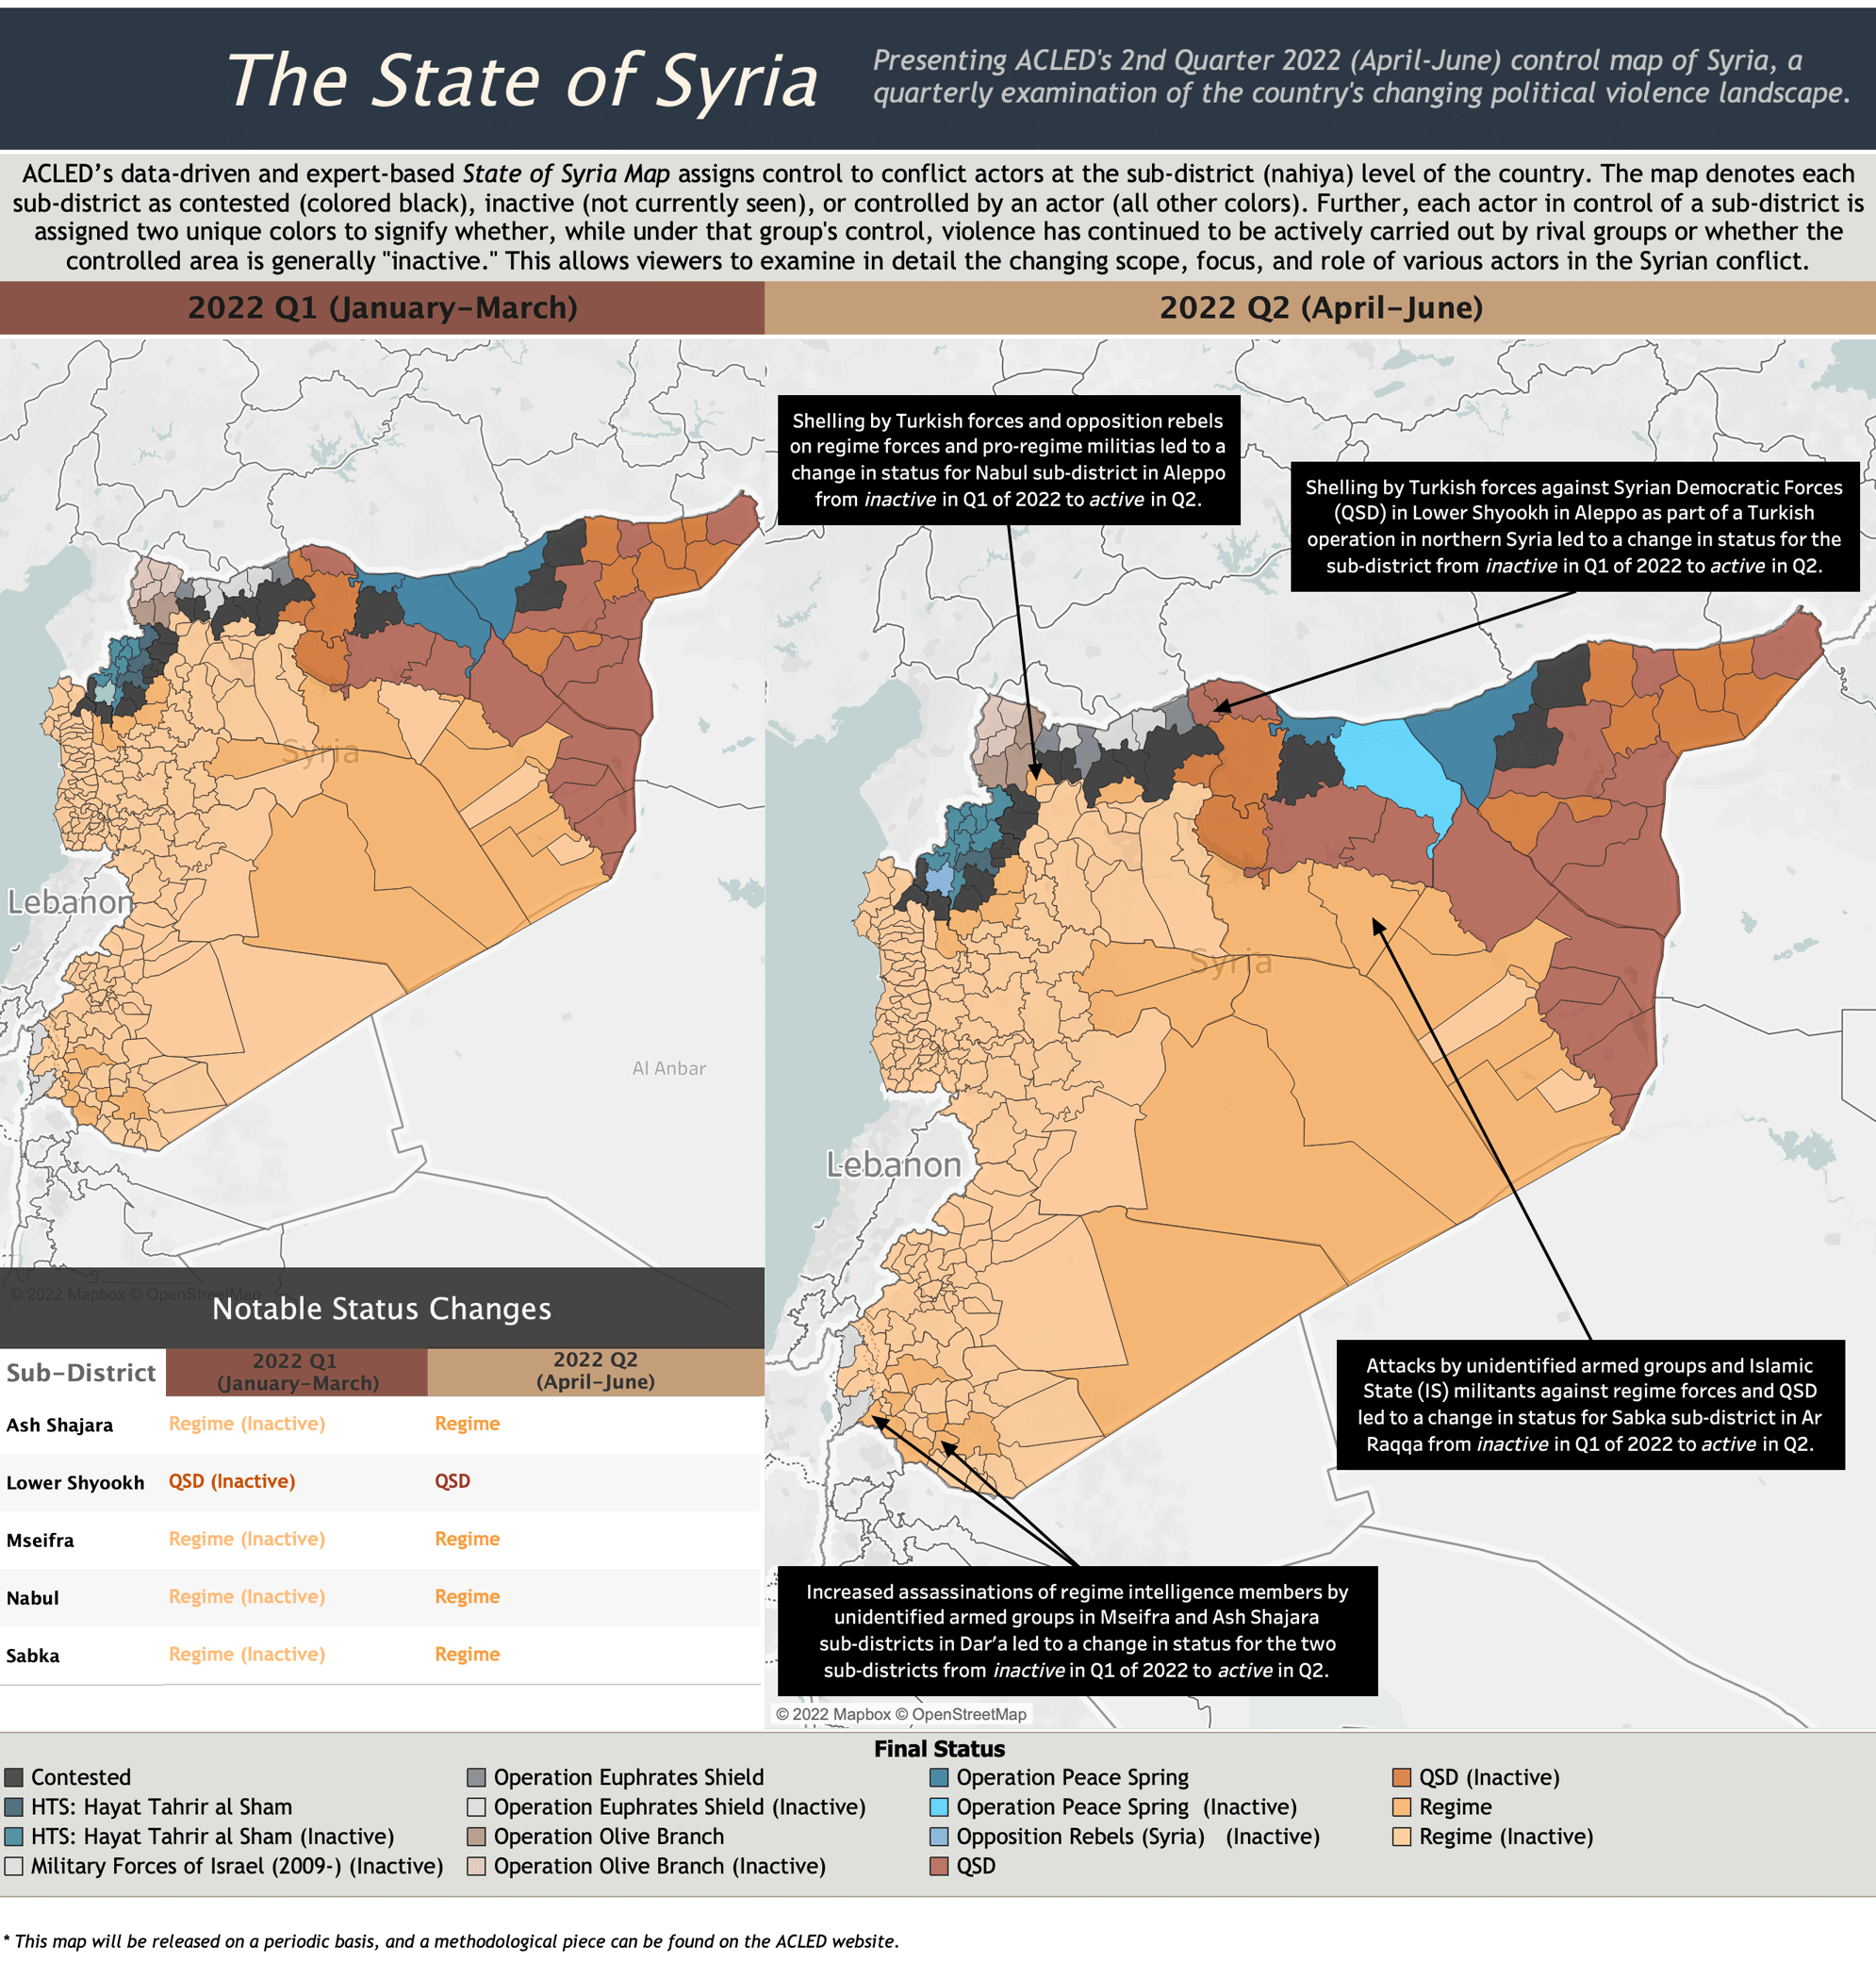 The State of Syria: Q1 2022 - Q2 2022